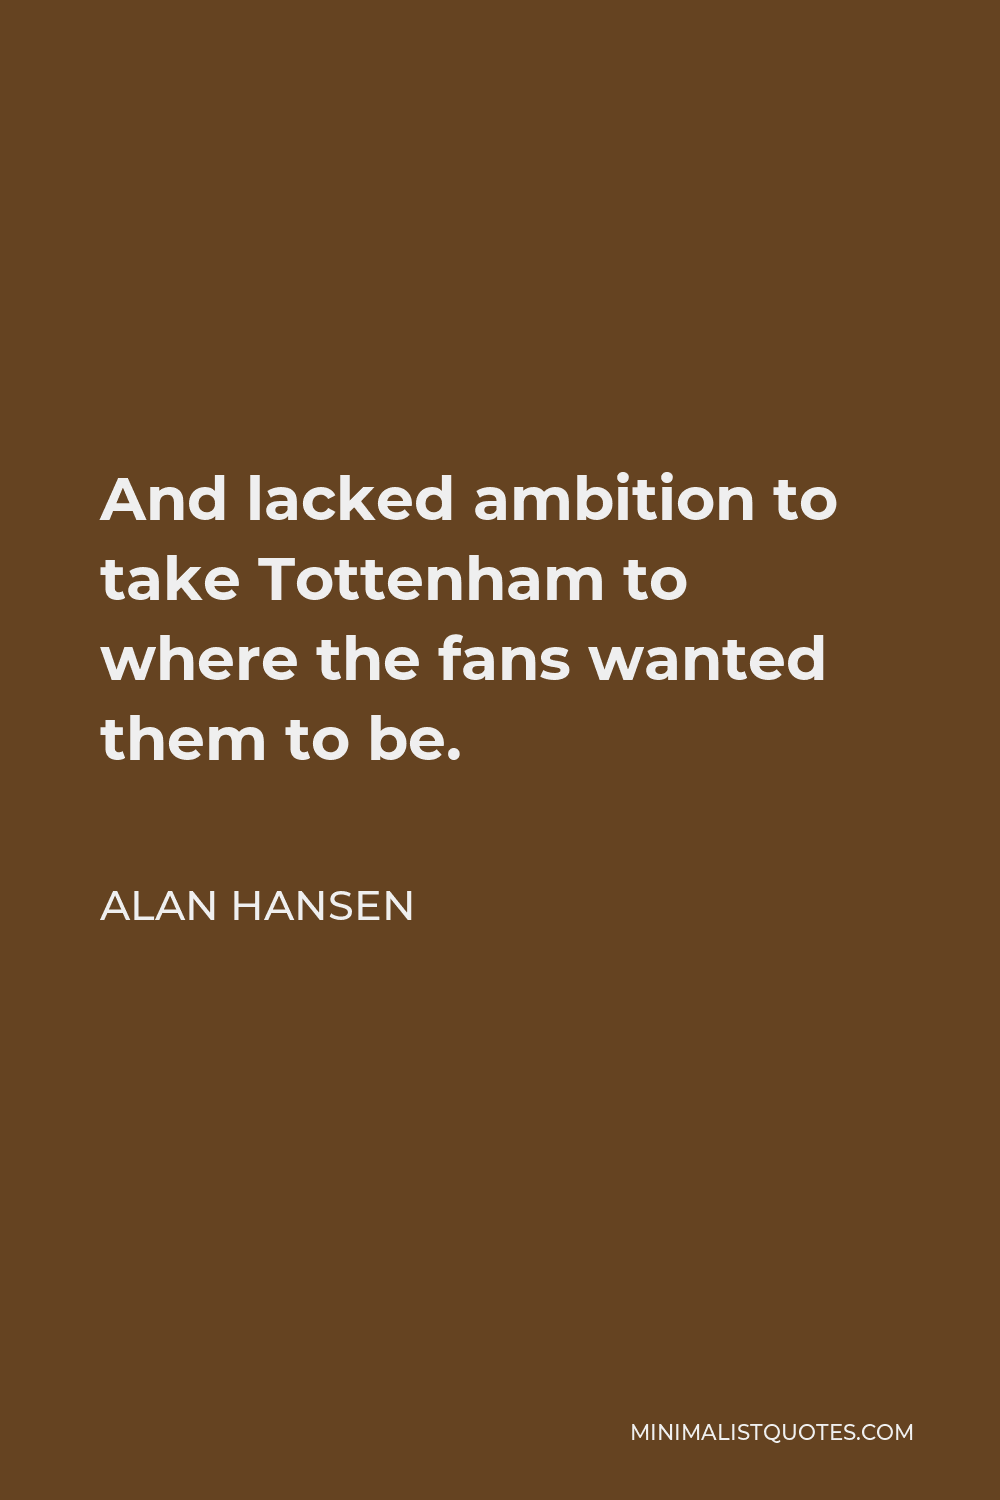 Alan Hansen Quote - And lacked ambition to take Tottenham to where the fans wanted them to be.